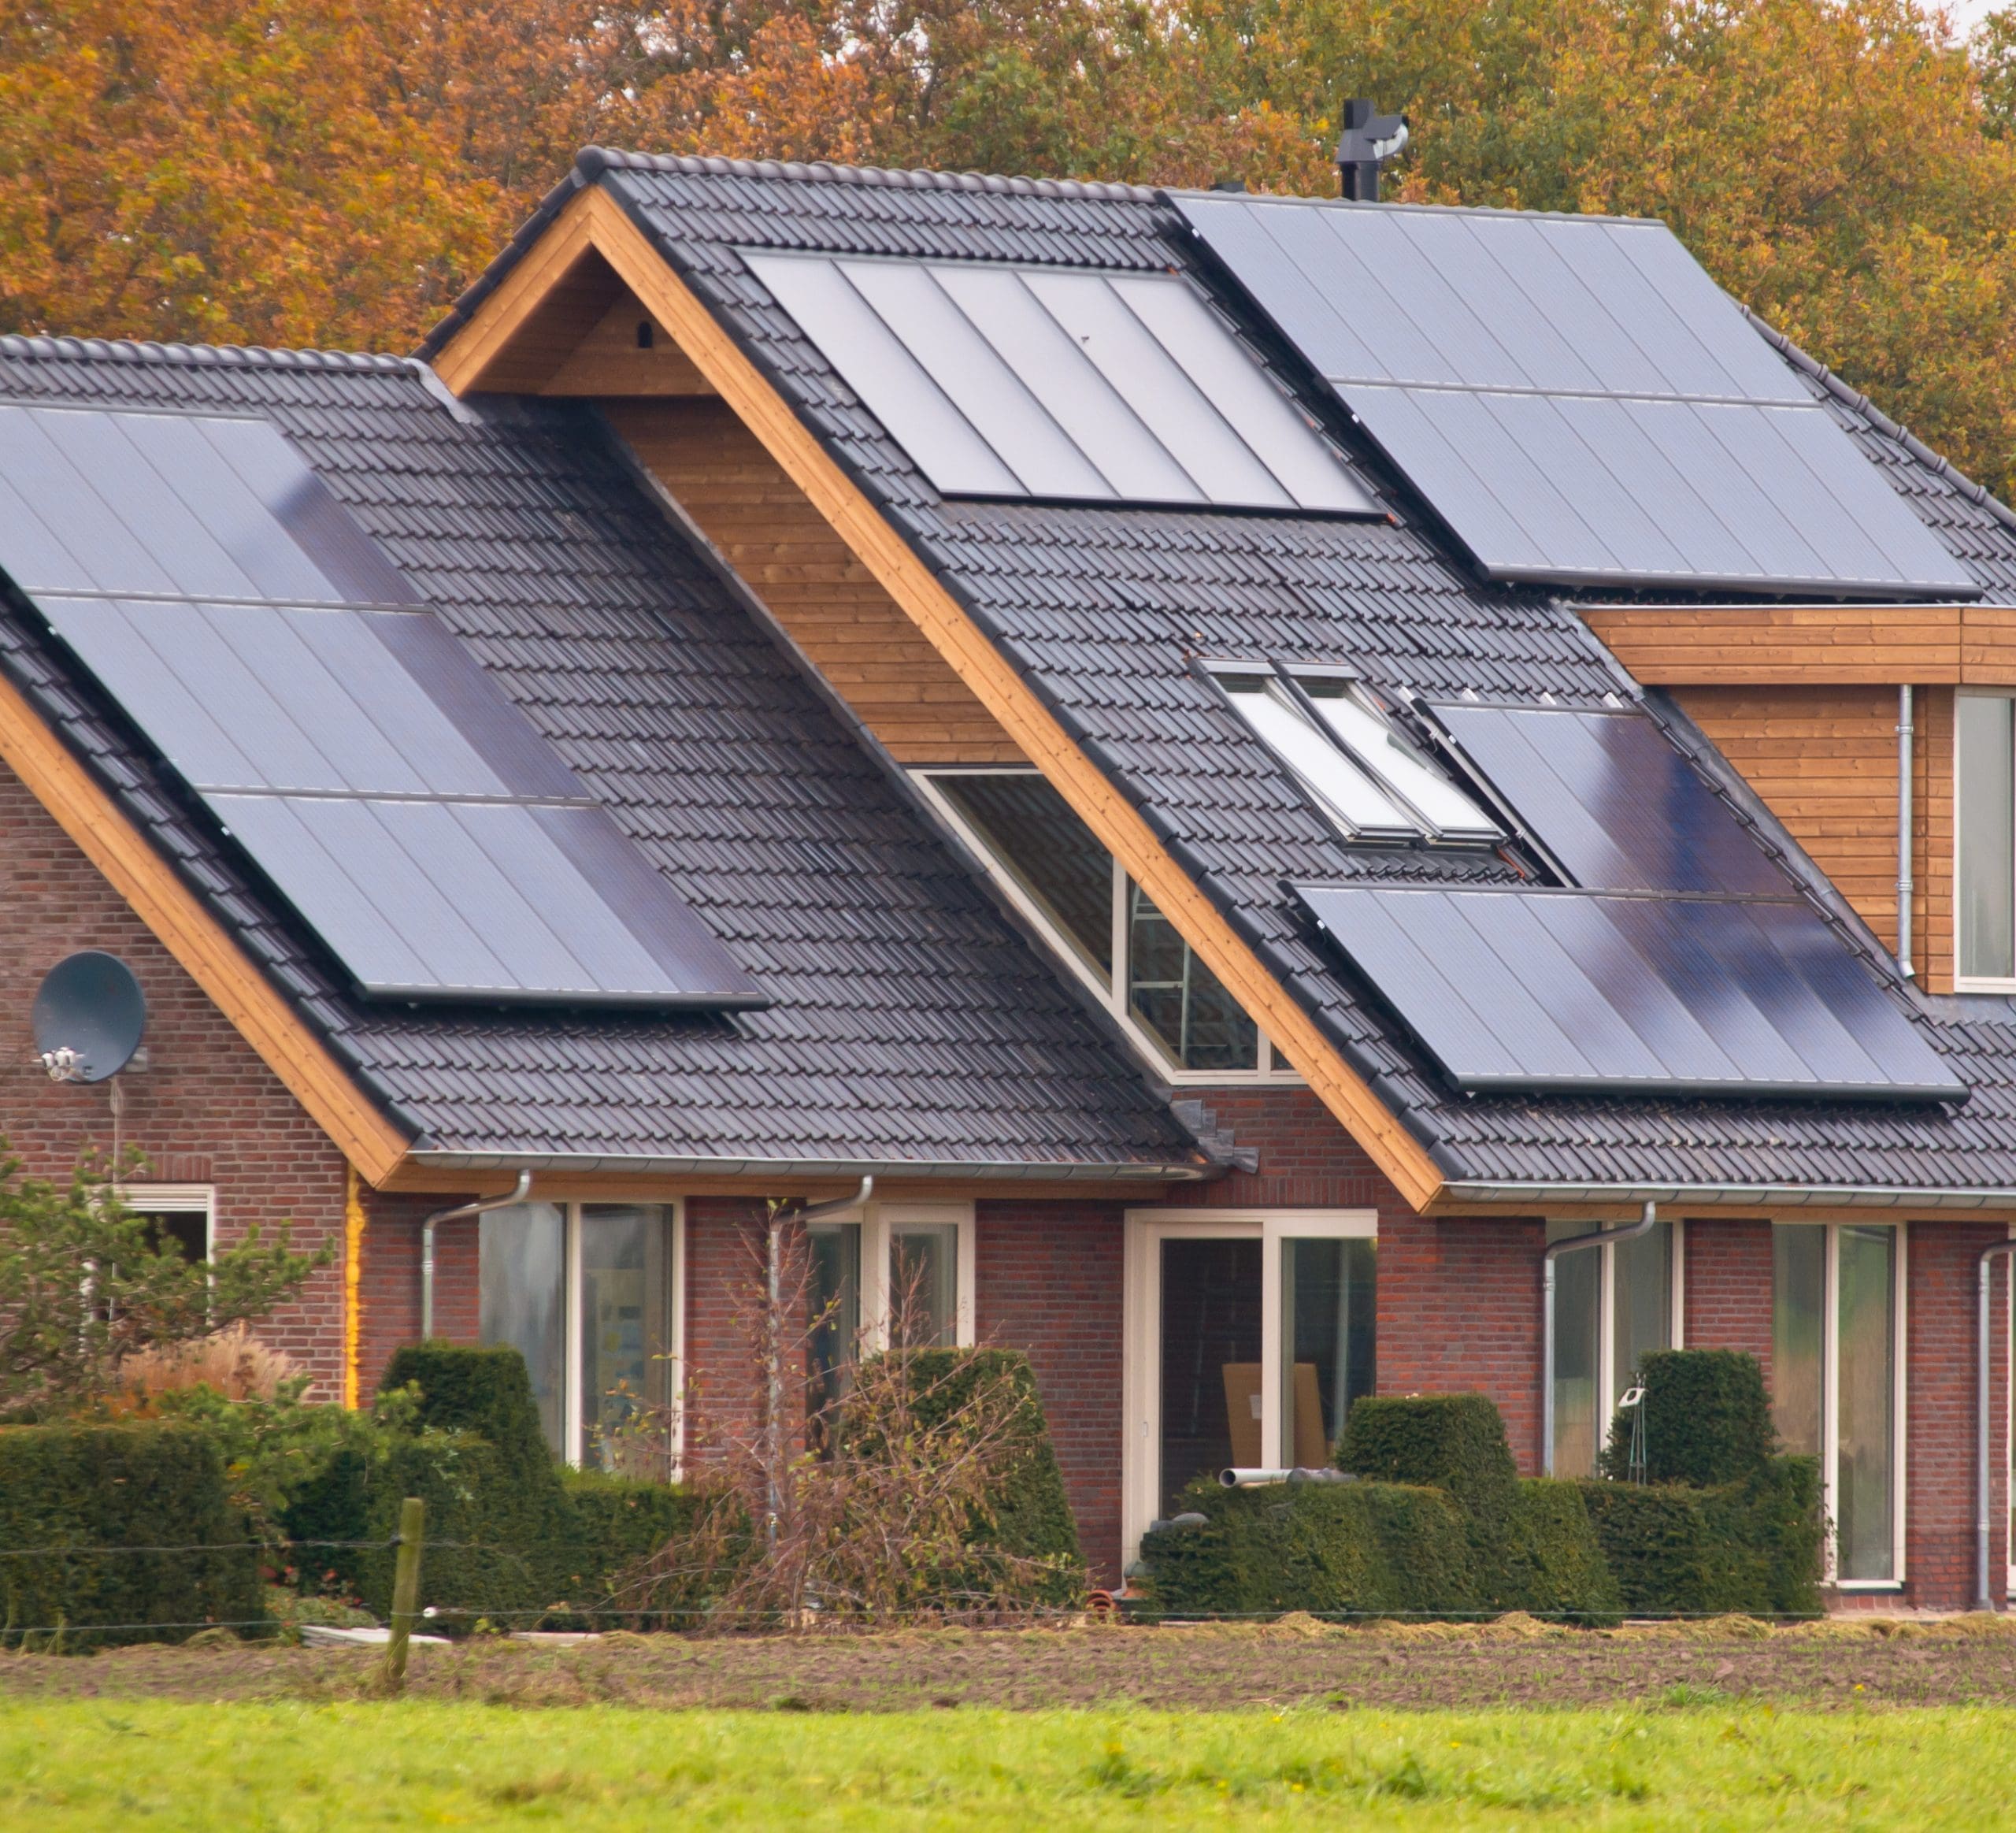 Should You Install Solar Panels on Your Home?